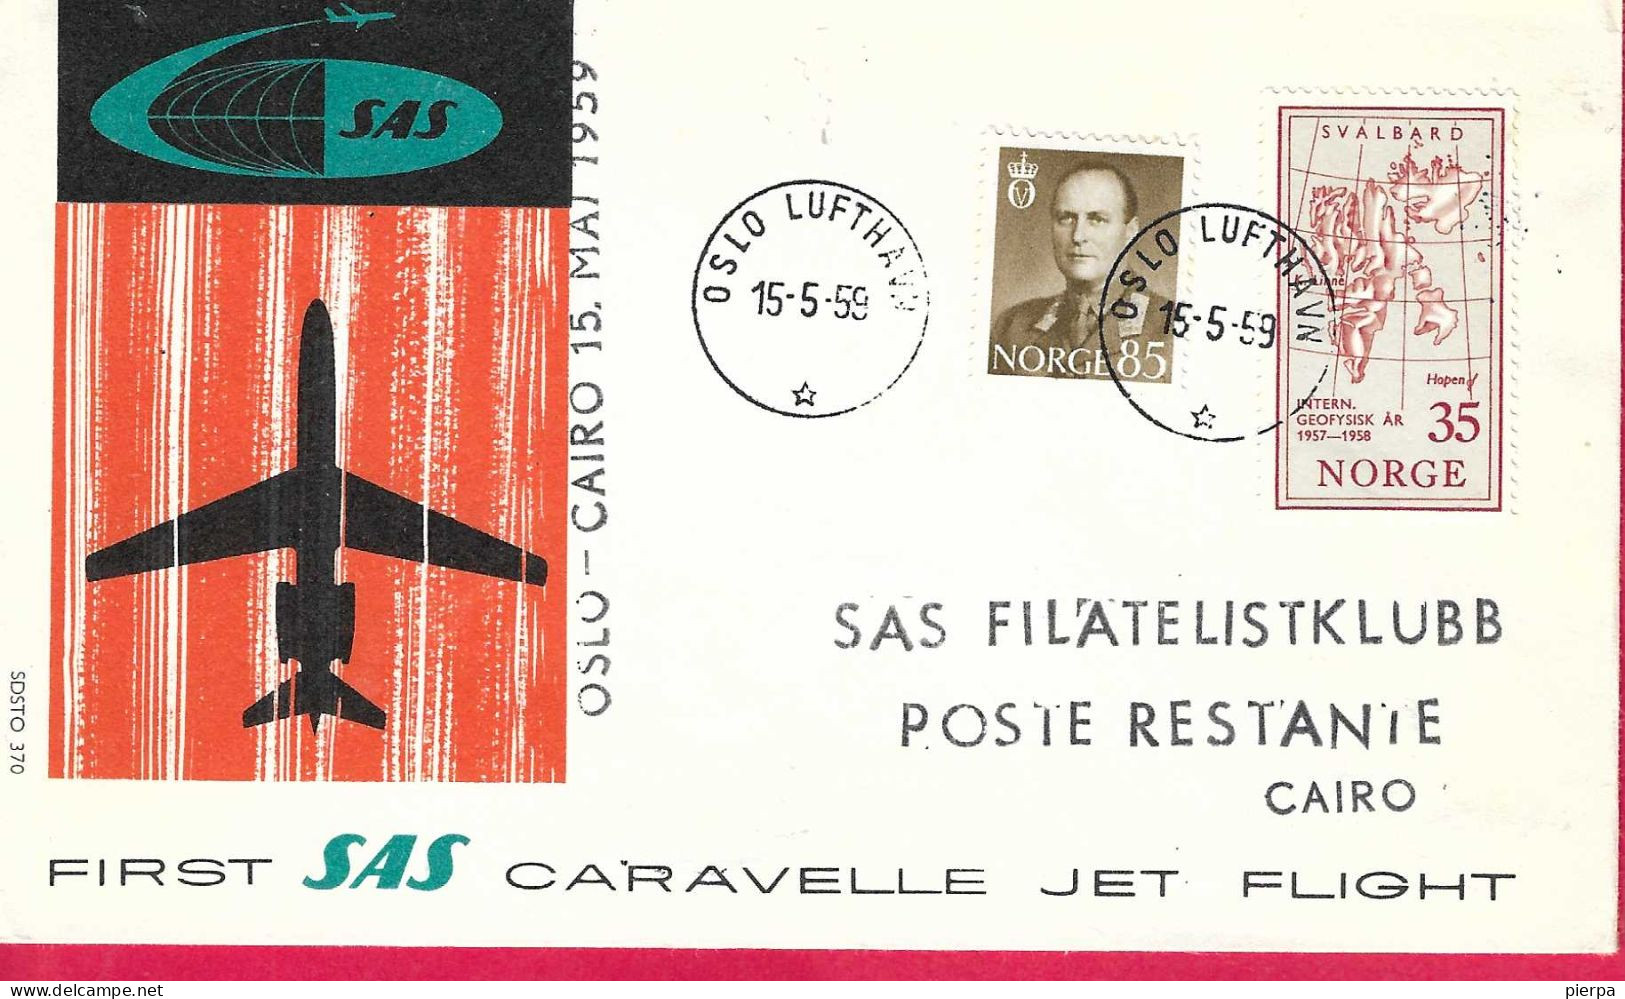 NORGE - FIRST SAS CARAVELLE FLIGHT - FROM OSLO TO CAIRO *15.5.59* ON OFFICIAL COVER - Briefe U. Dokumente